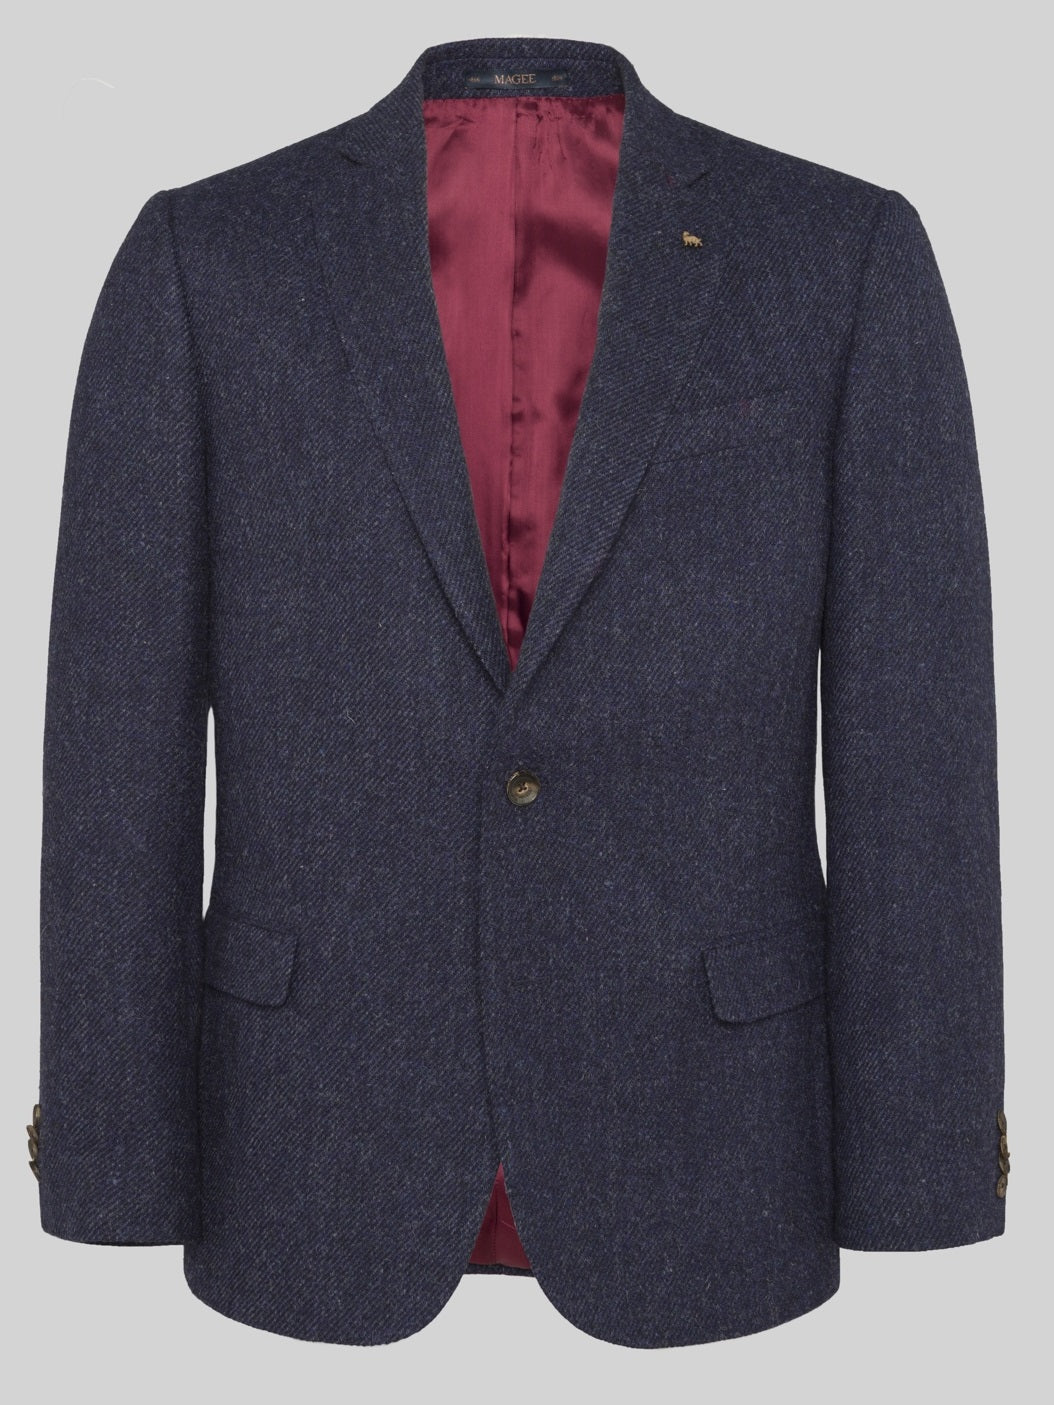 MAGEE Handwoven Donegal Tweed Jacket - Mens Liffey -  Blue Twill